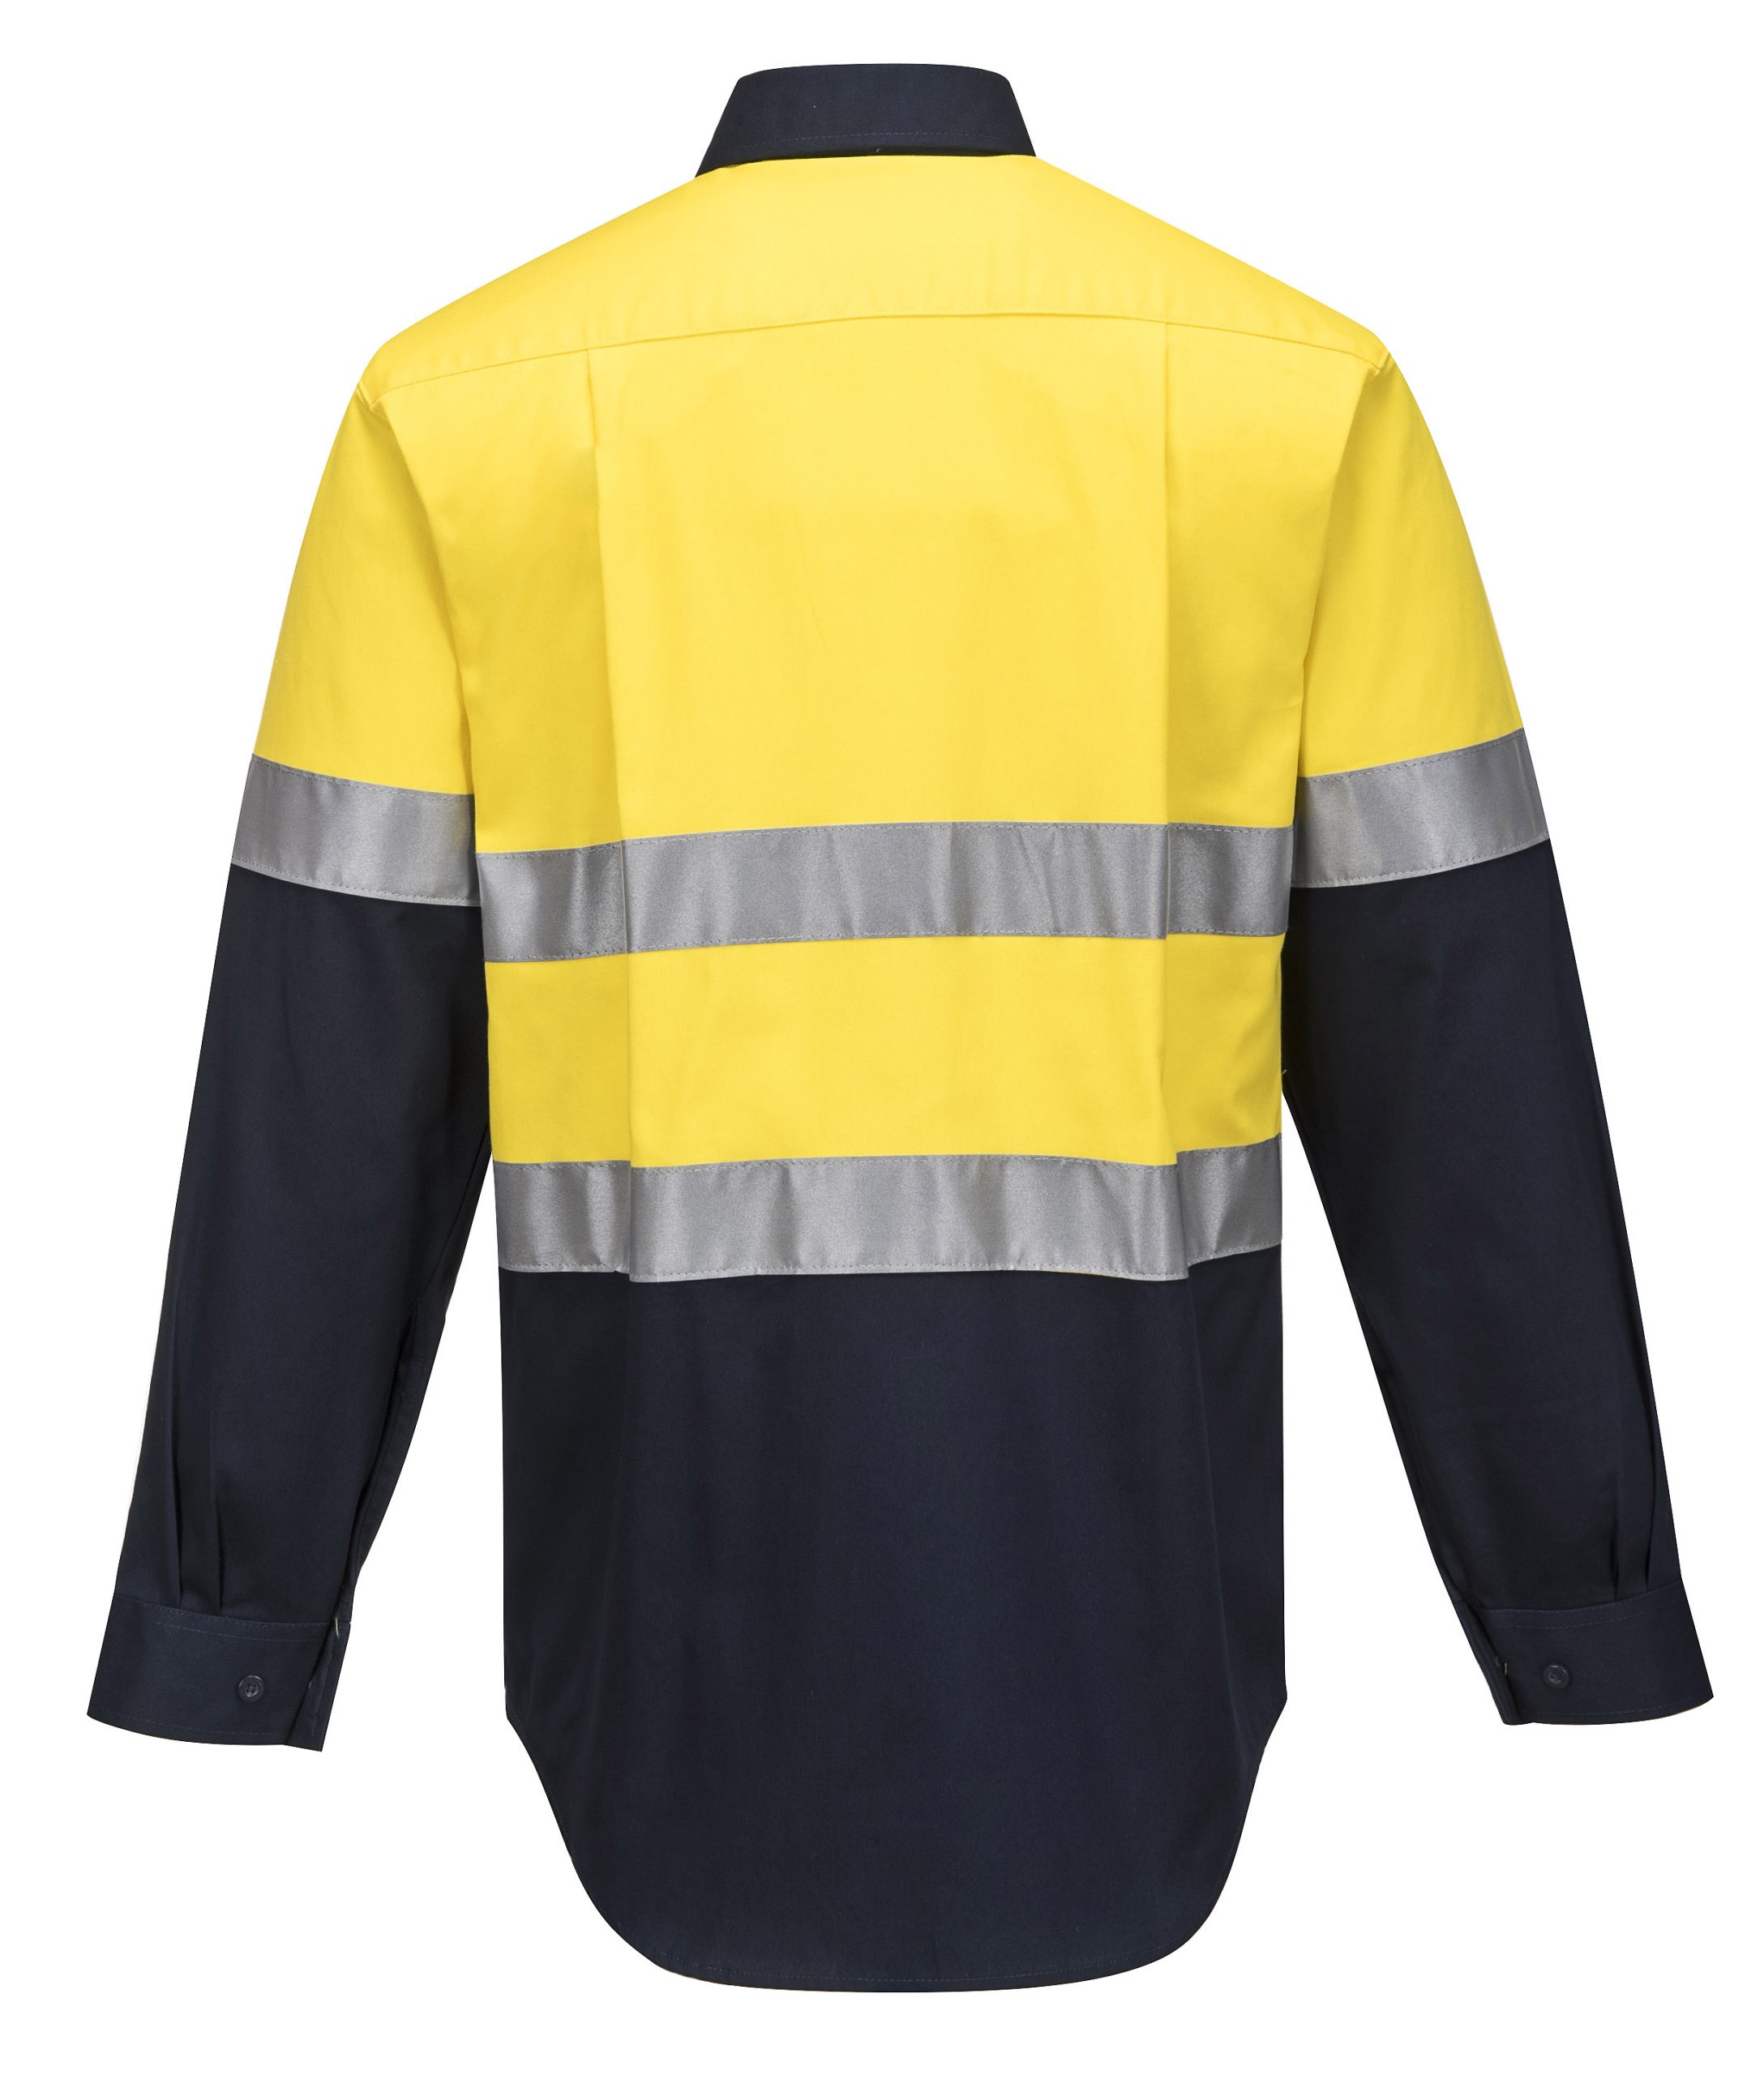 MA101 - Hi-Vis Two Tone Regular Weight Long Sleeve Shirt with Tape Y2